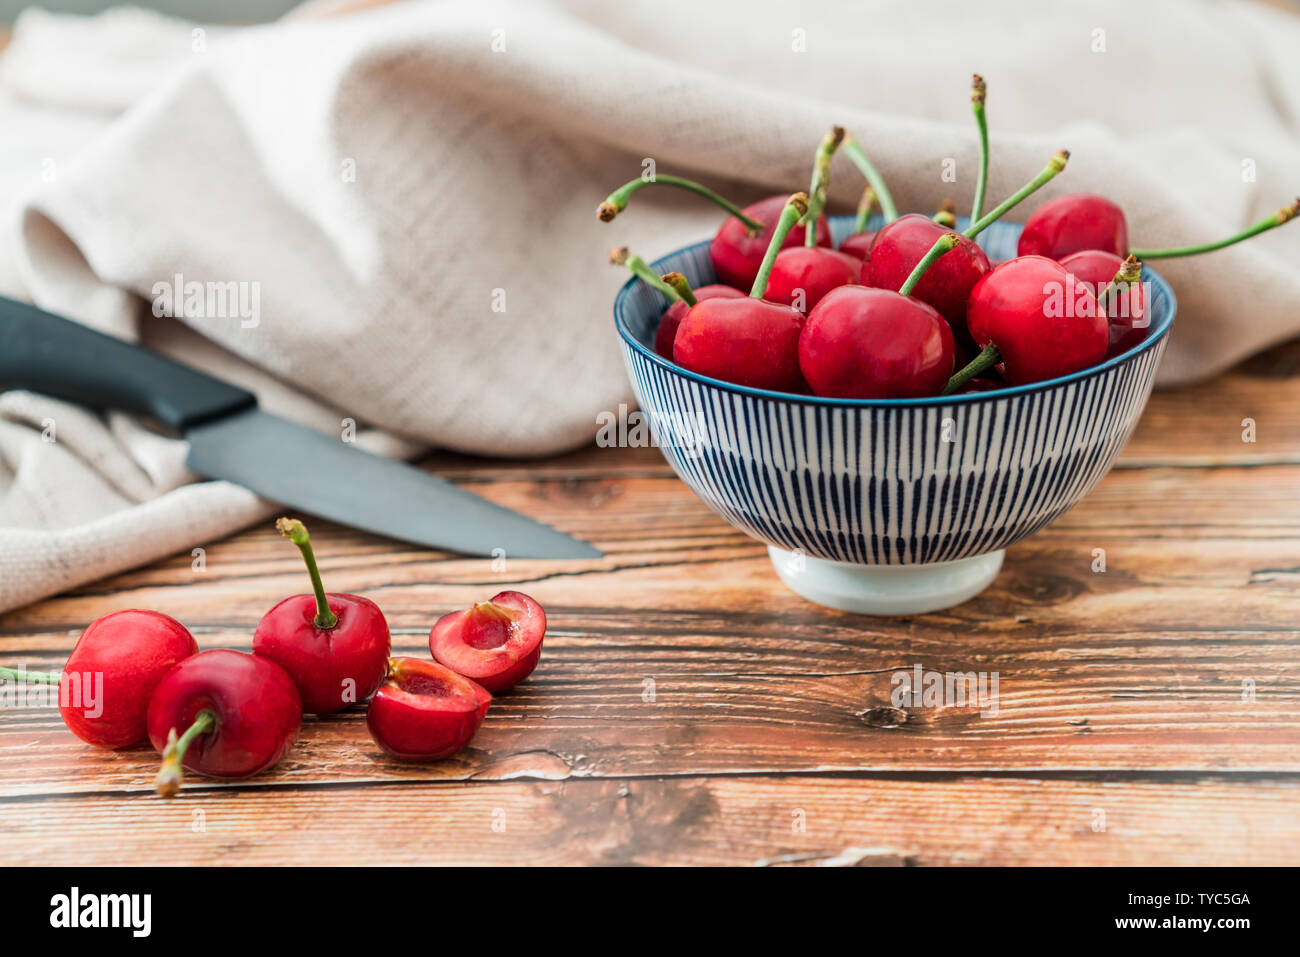 A bowl of delicious cherries. Stock Photo